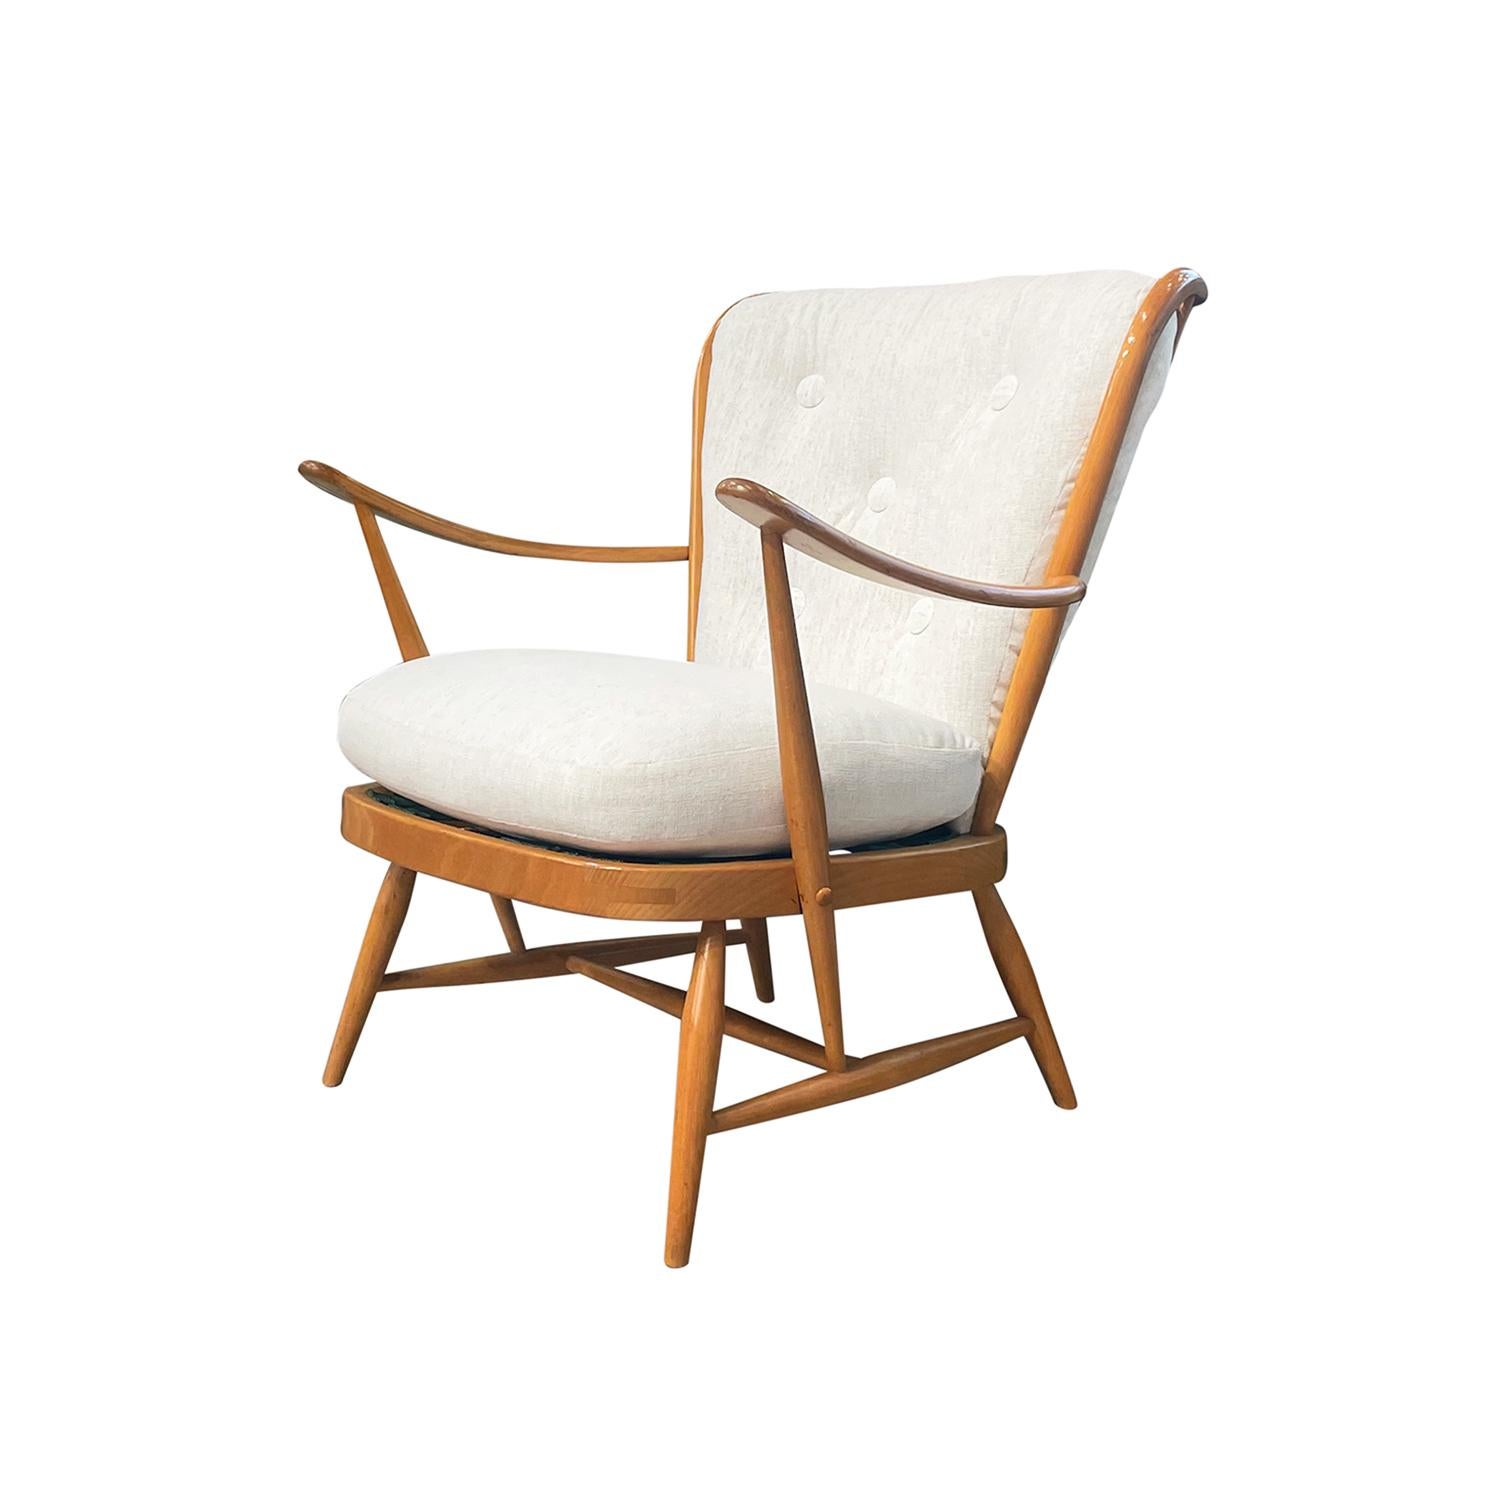 20th Century English Modern Beechwood Armchair - Single Vintage Side Chair In Good Condition For Sale In West Palm Beach, FL